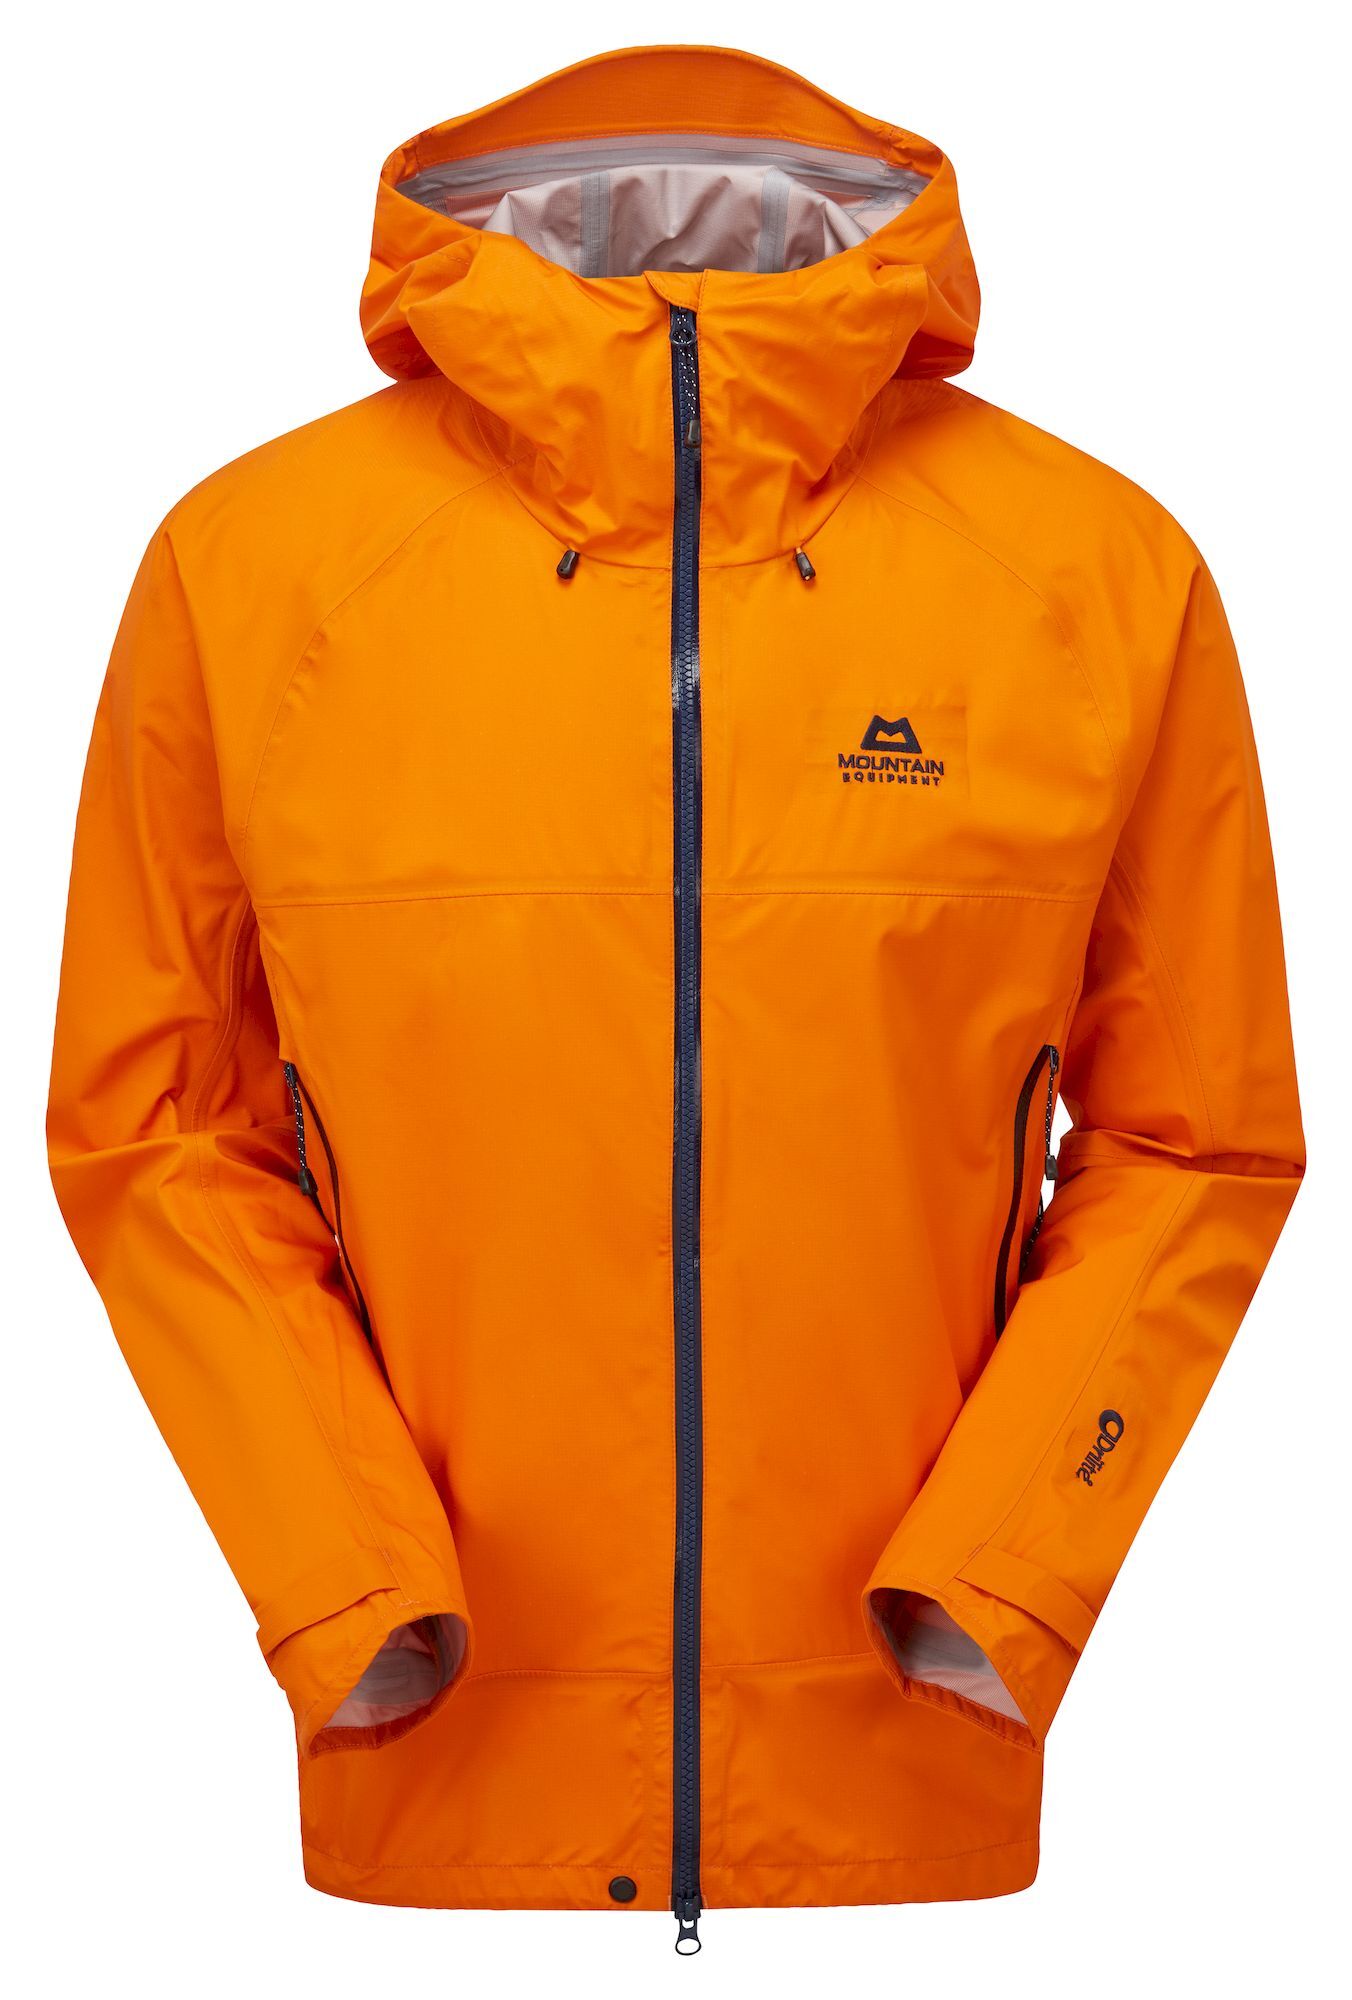 Mountain Equipment Odyssey Jacket - Chaqueta impermeable - Hombre | Hardloop